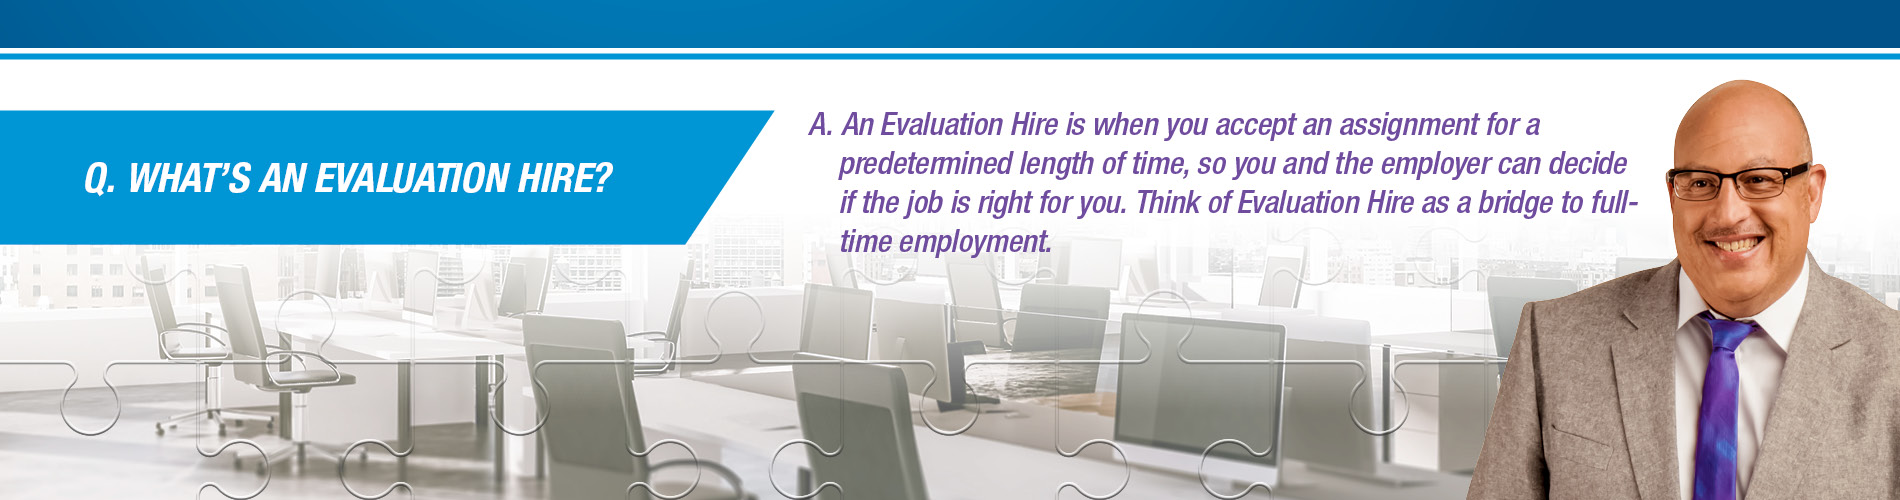 What Is Express? - What's An Evaluation Hire?